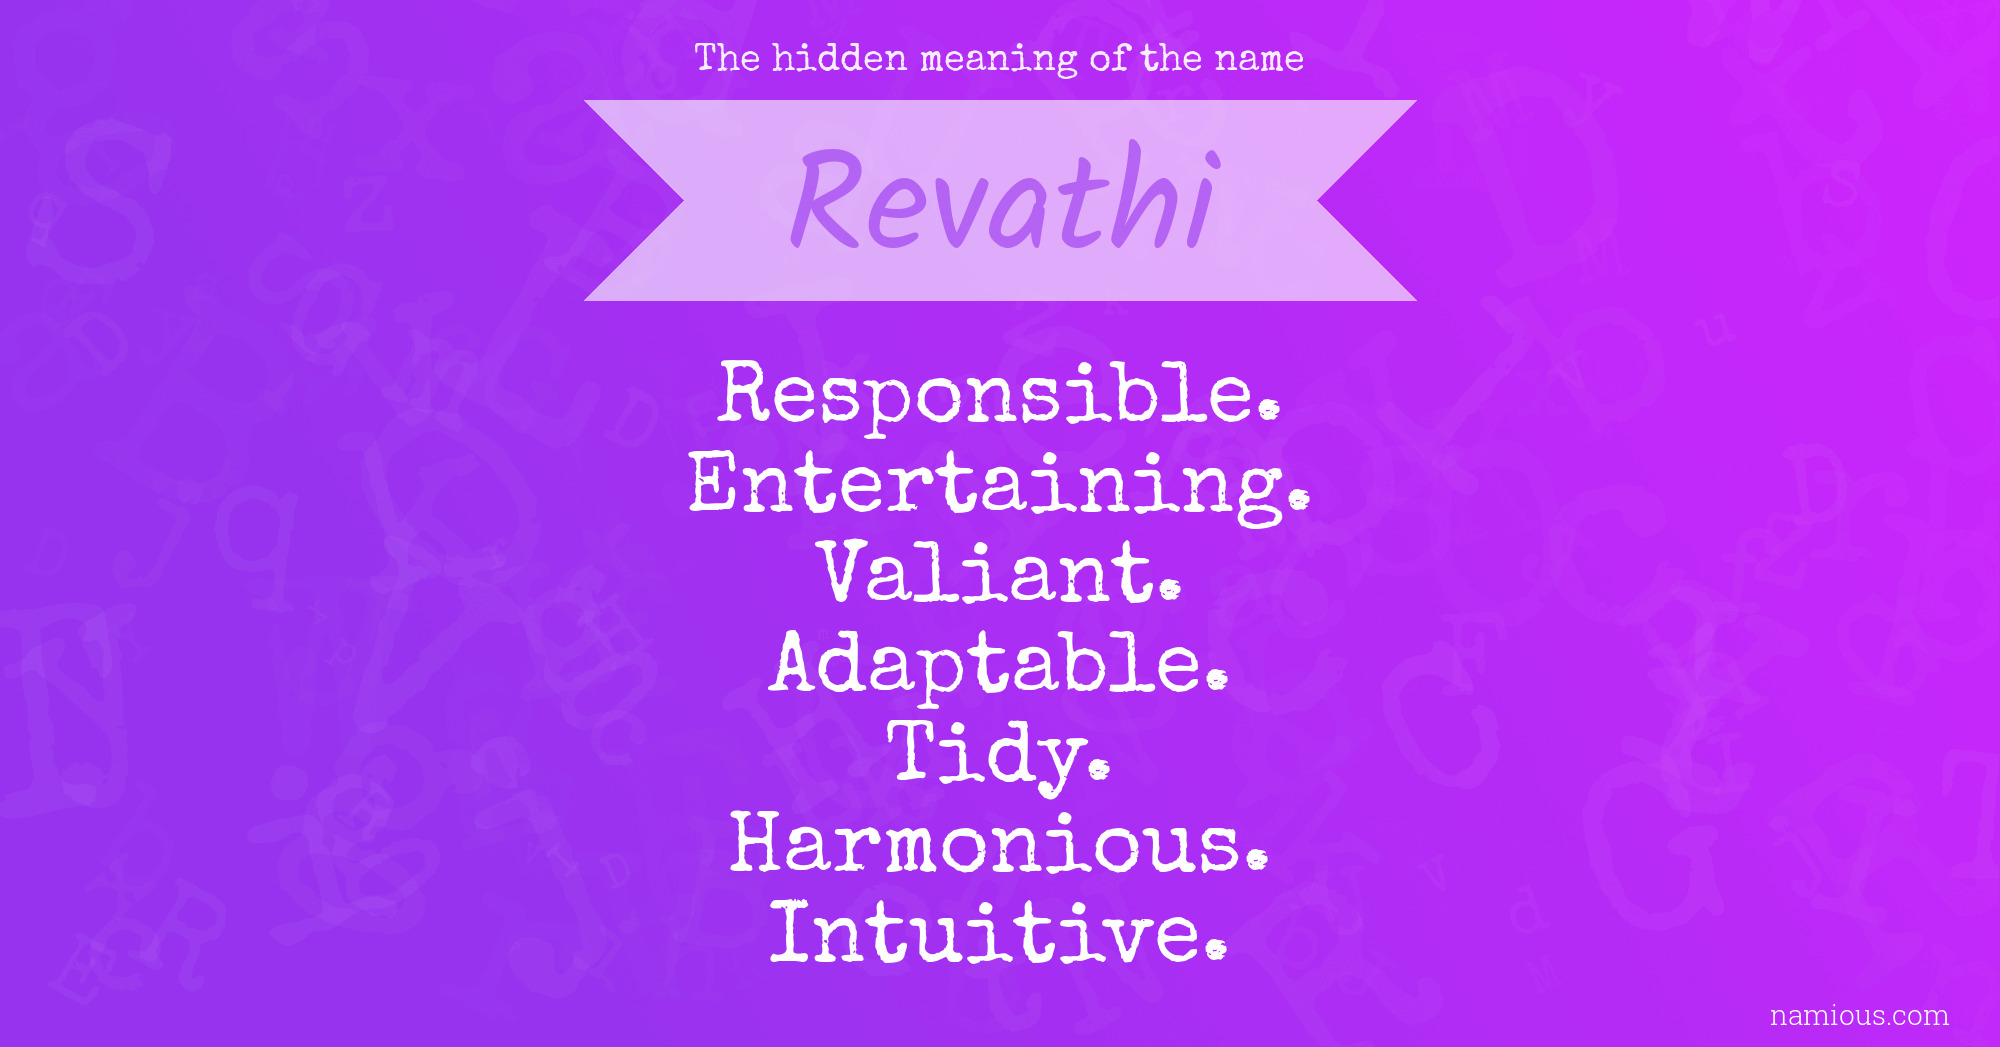 The hidden meaning of the name Revathi